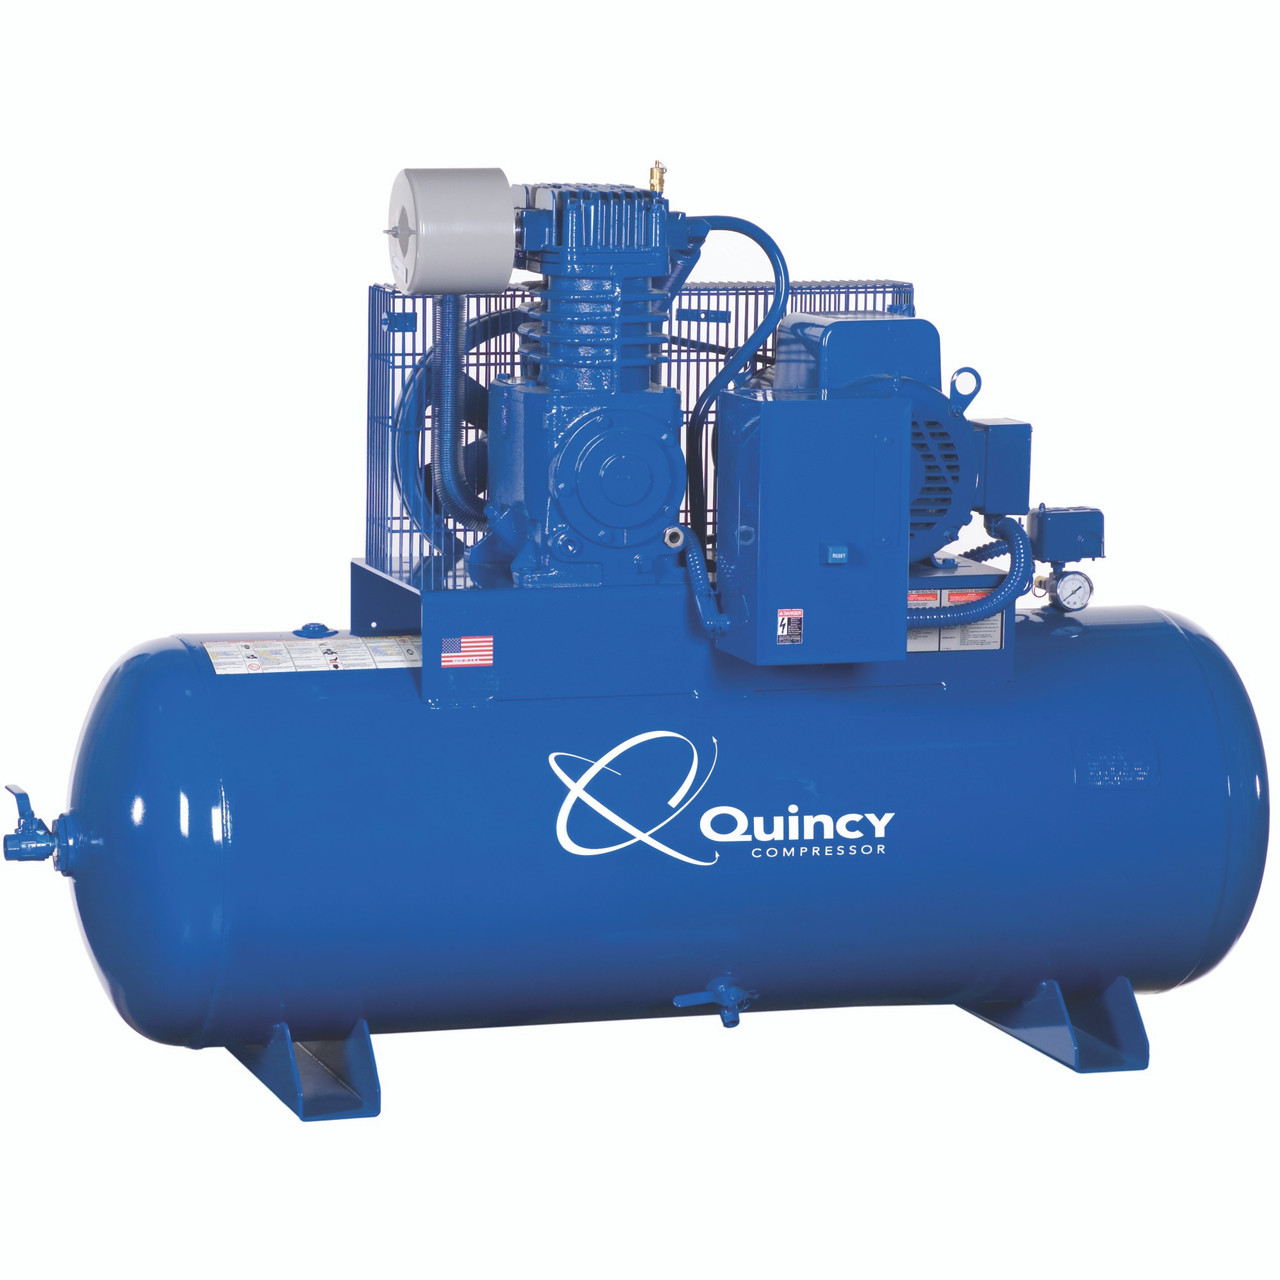 Quincy 3103DS12HCA20 10 HP QP PRO, 200 Volt Three Phase, Two Stage, 120 Gallon Horizontal Air Compressor